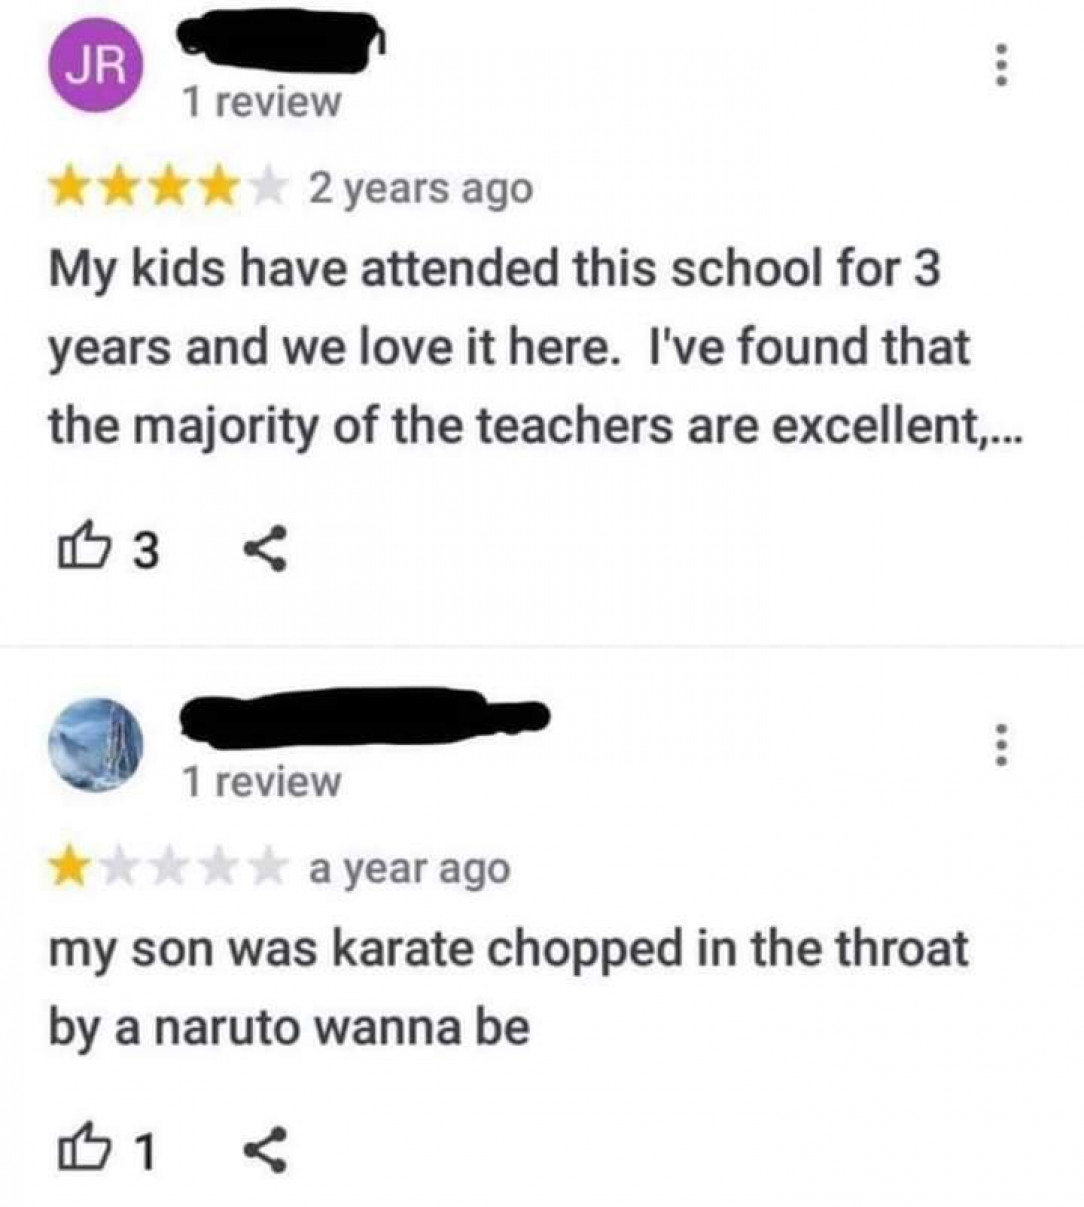 Naruto- lord of the karate chops